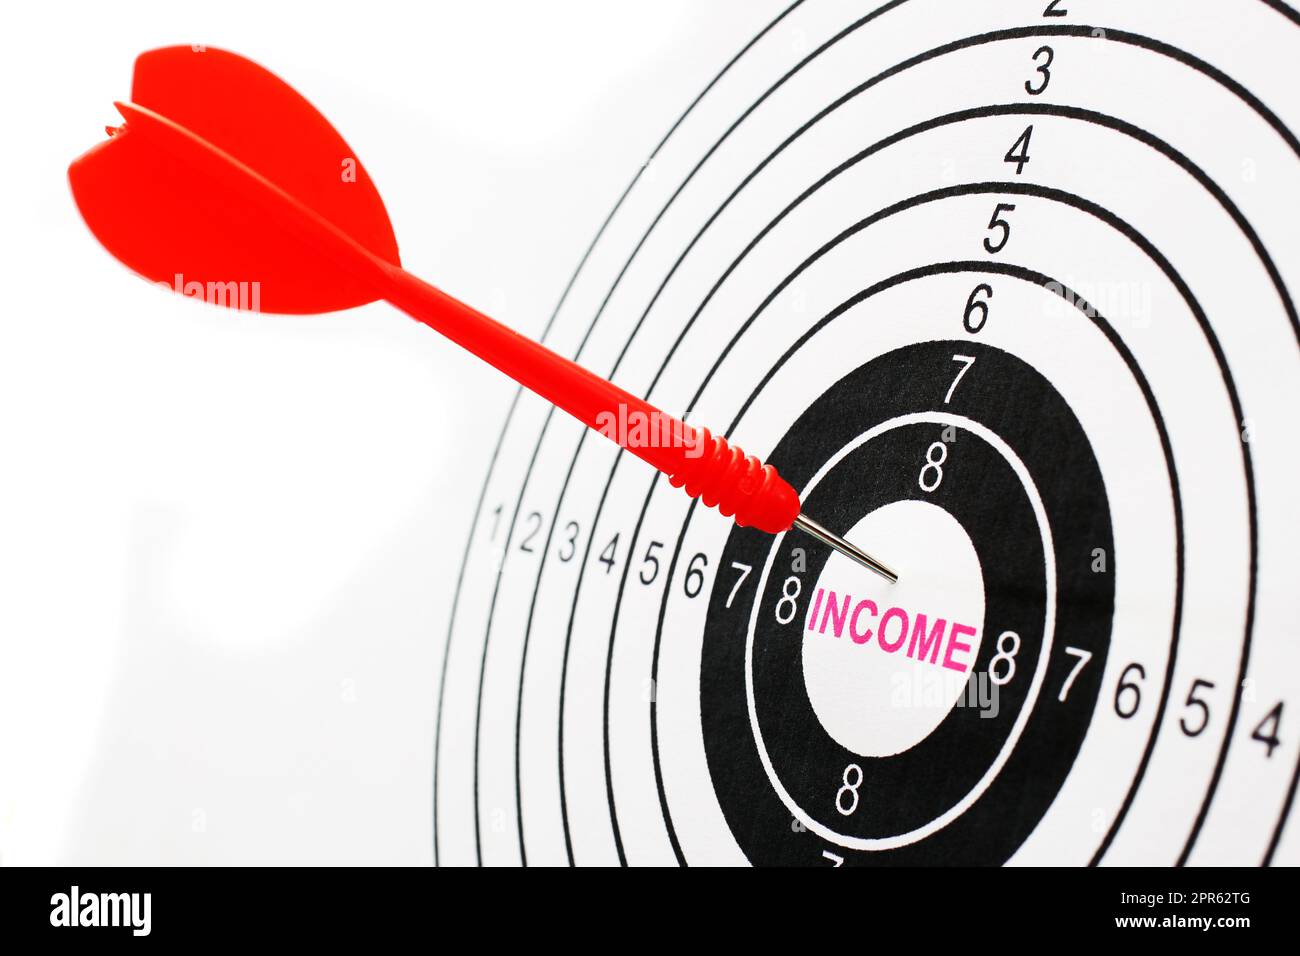 Income target Stock Photo